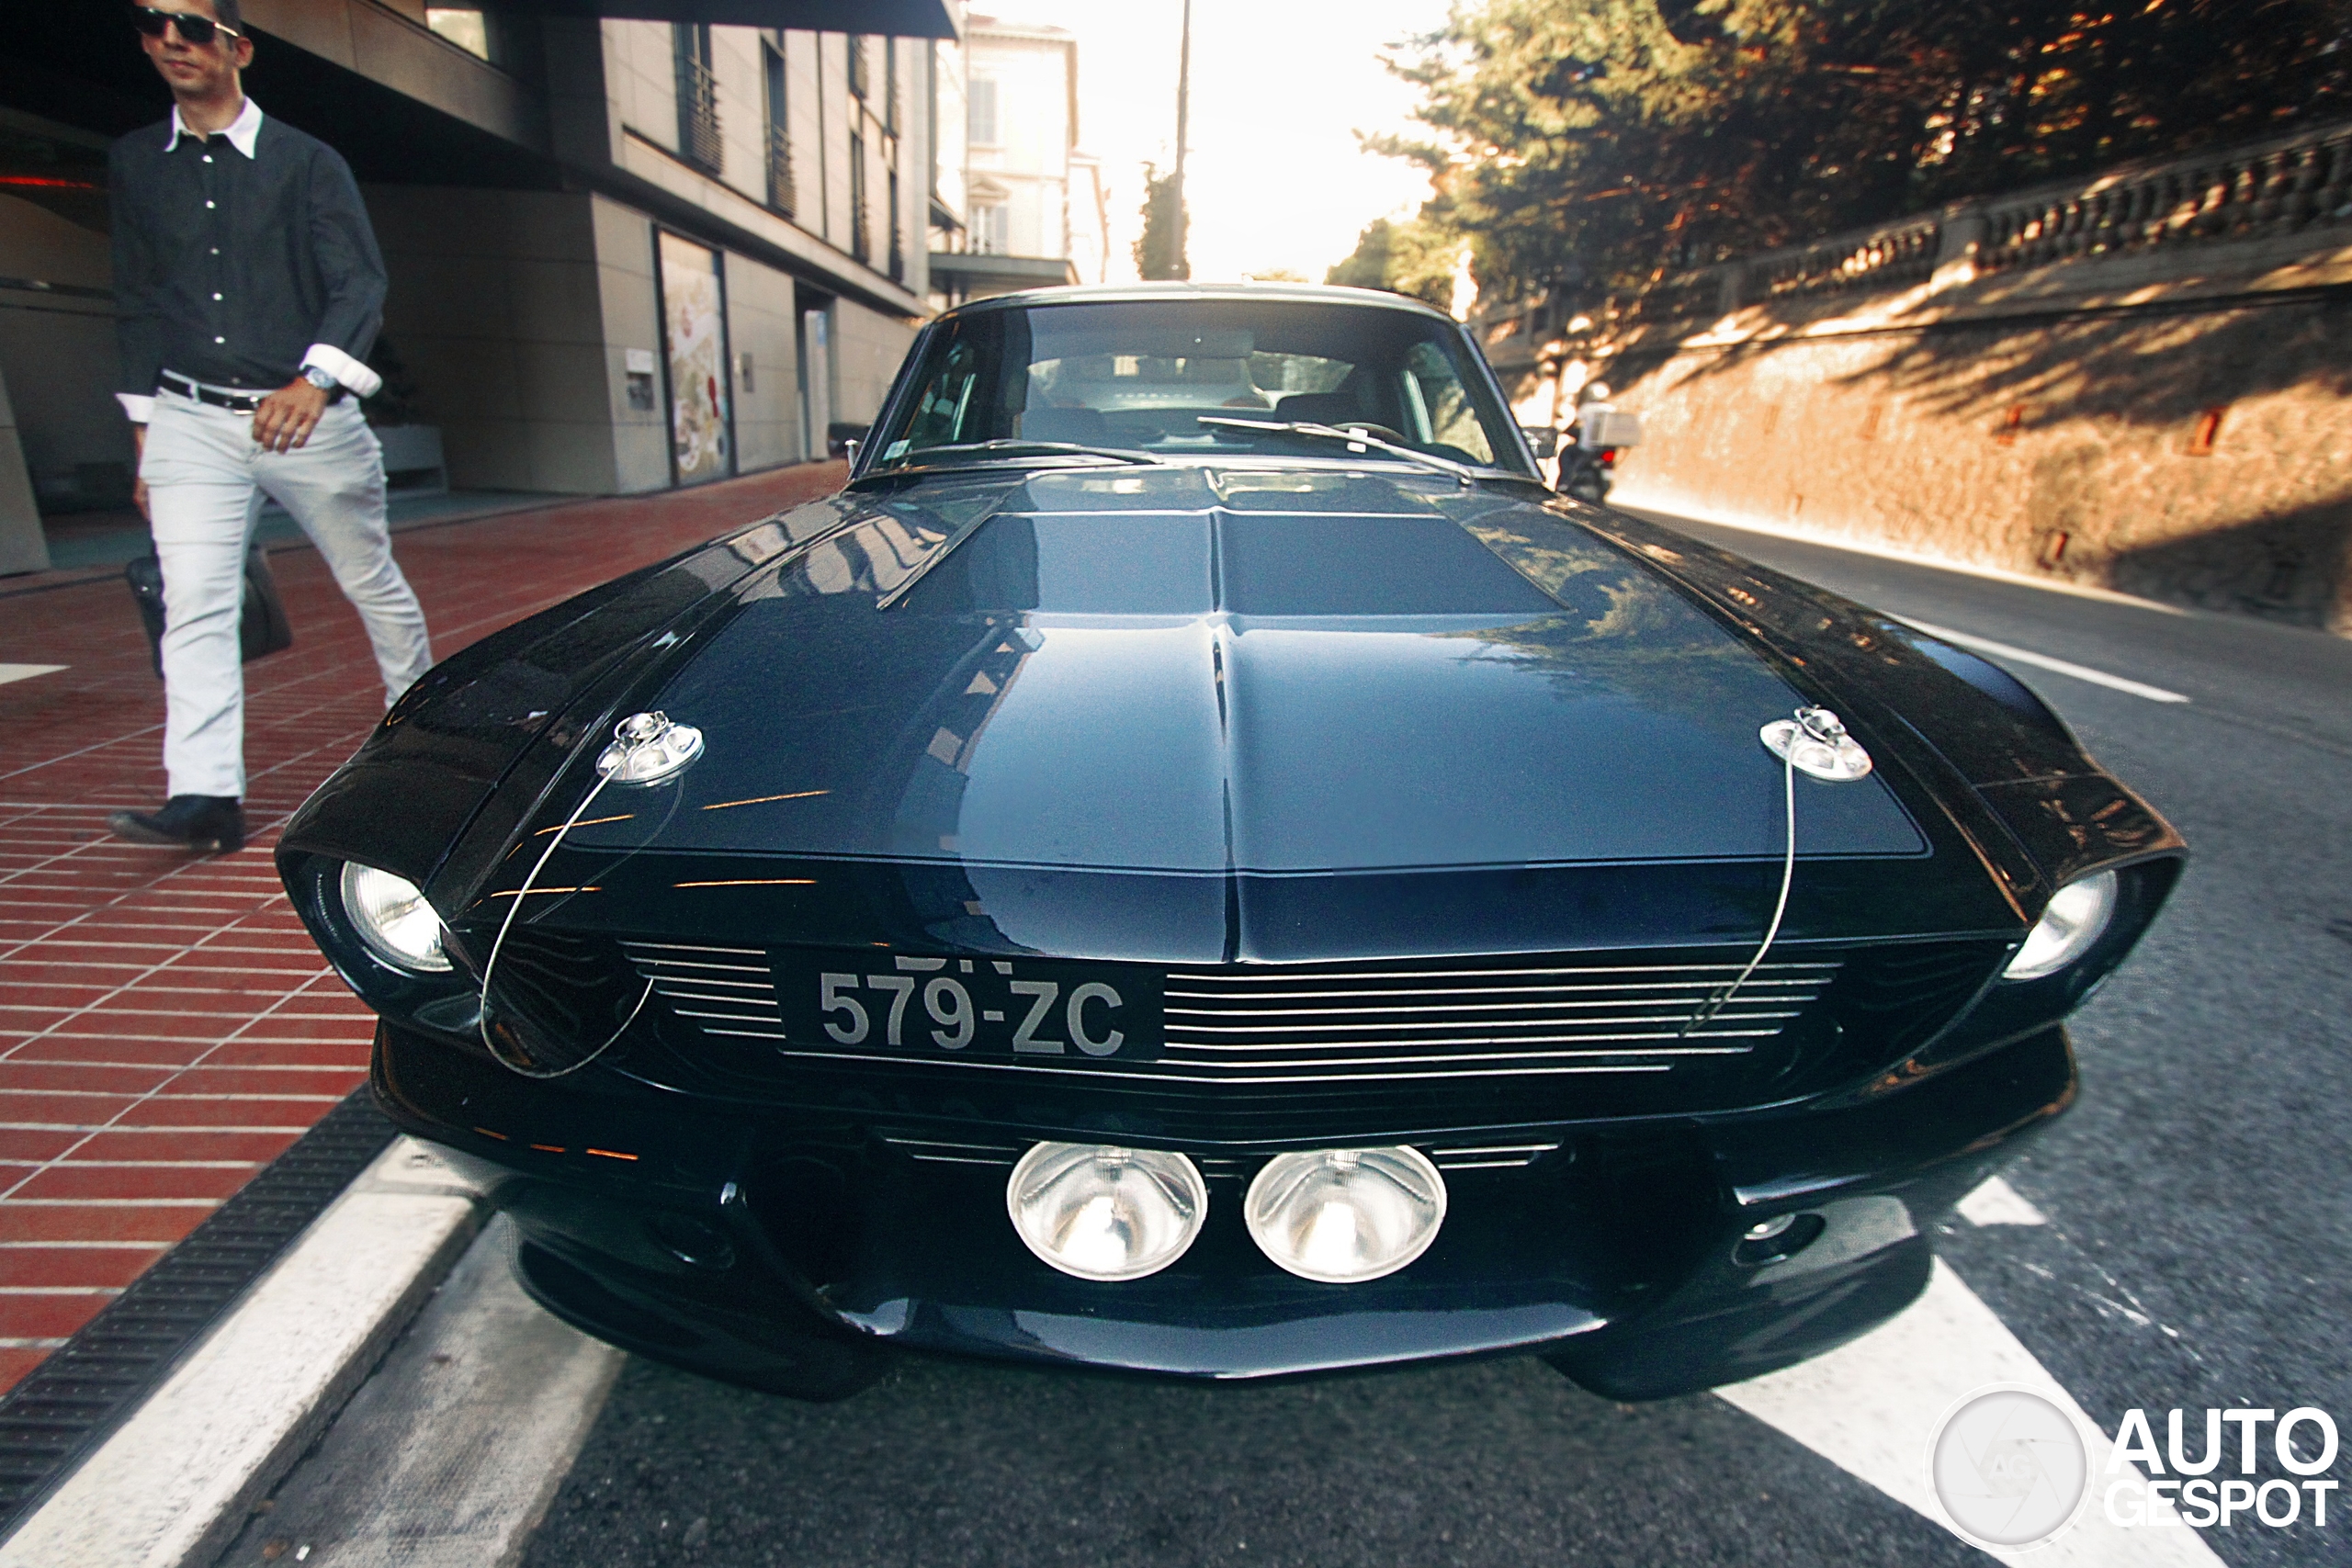 Ford Mustang Shelby G.T. 500E Eleanor